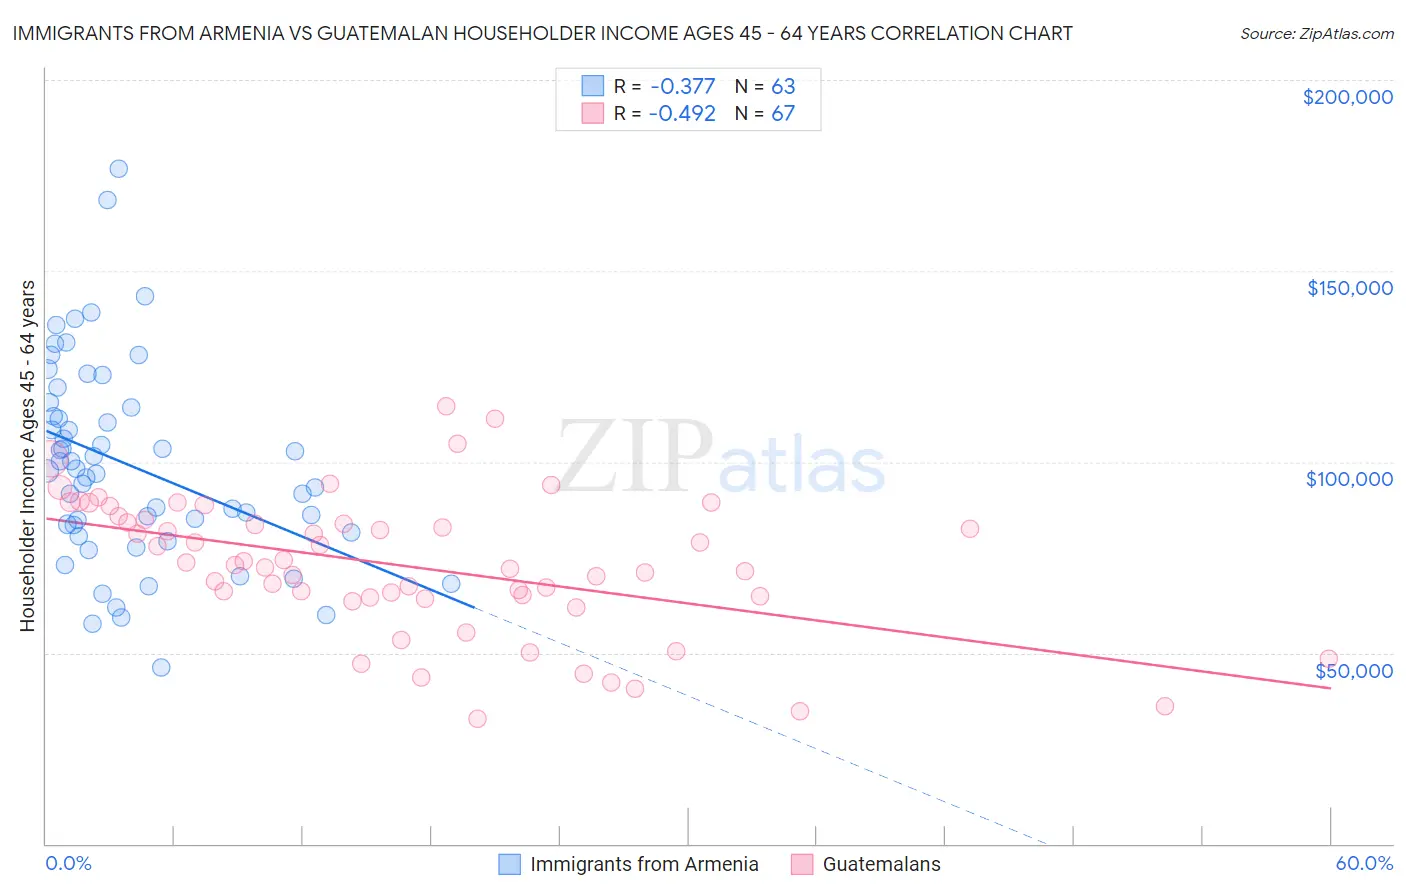 Immigrants from Armenia vs Guatemalan Householder Income Ages 45 - 64 years